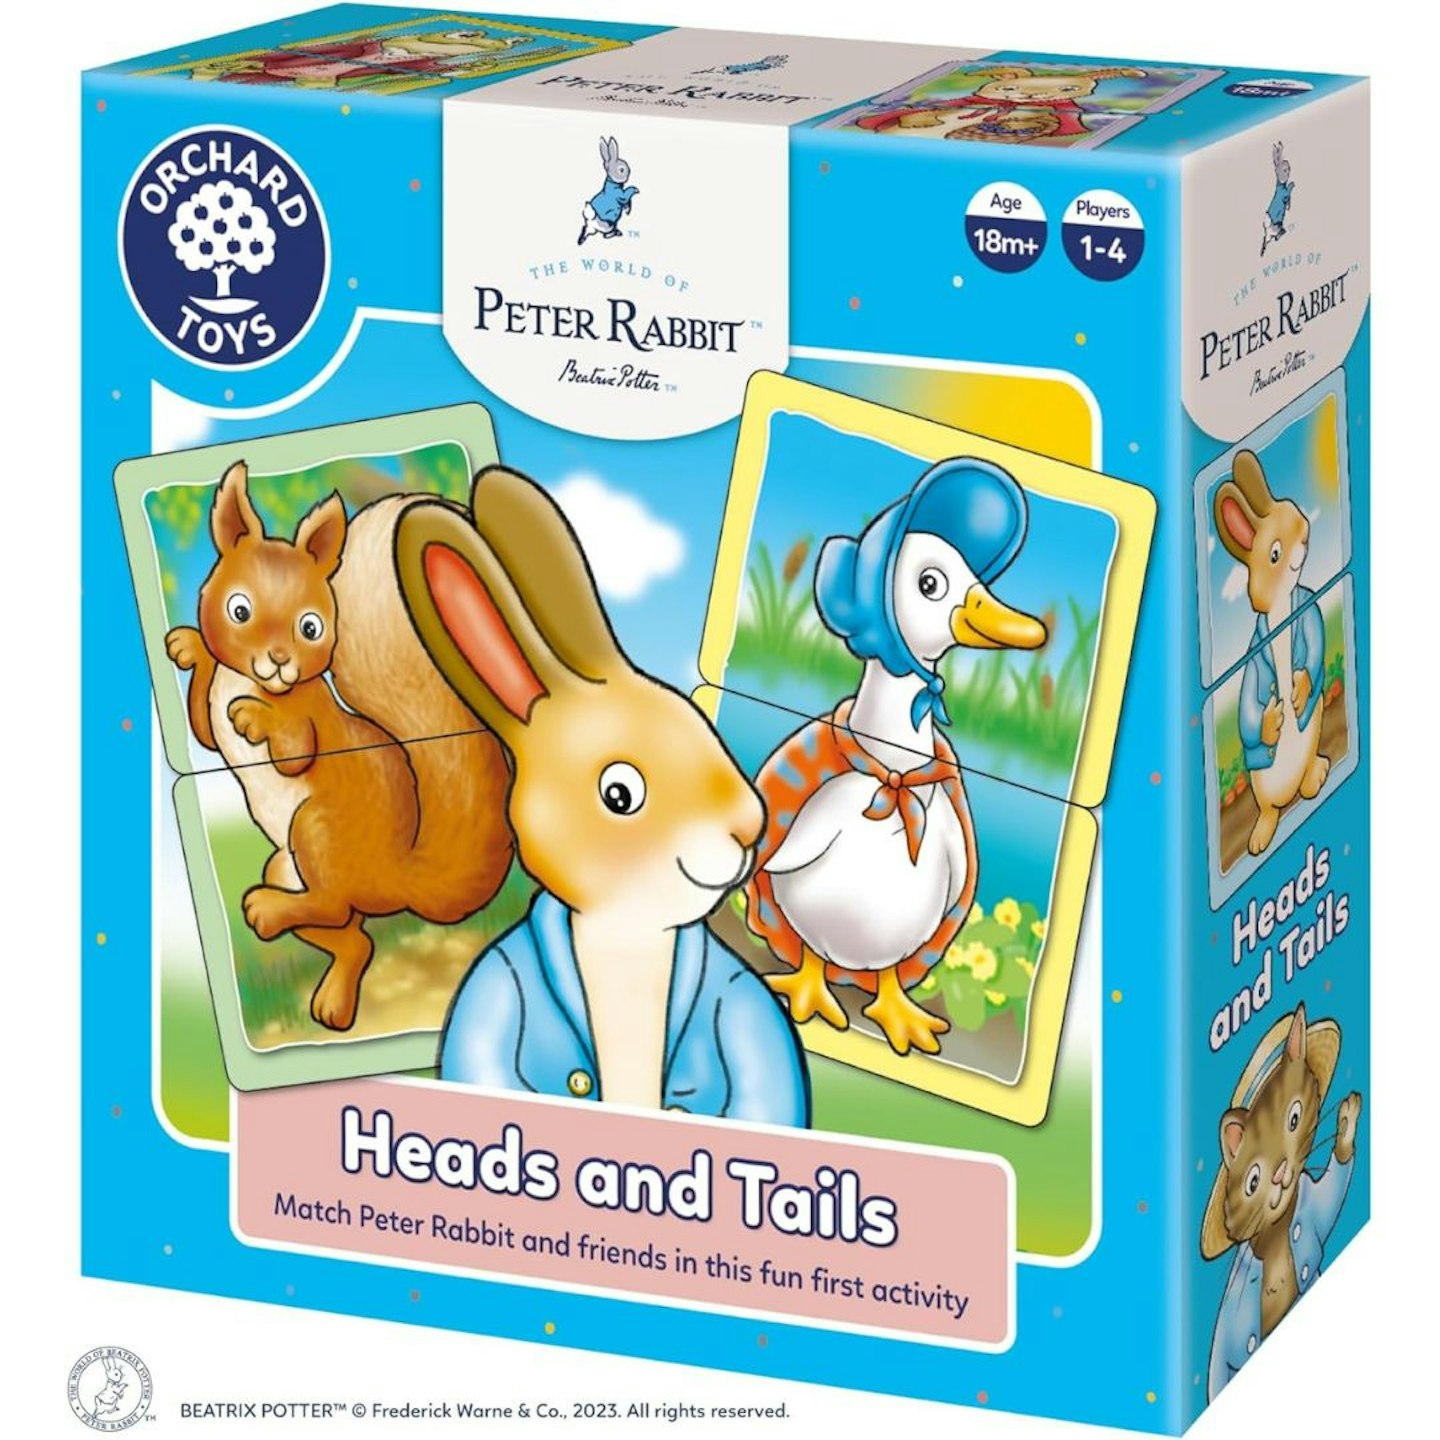 The Best Toys For One-Year-Olds: Peter Rabbit™ Heads and Tails Game By Orchard Toys